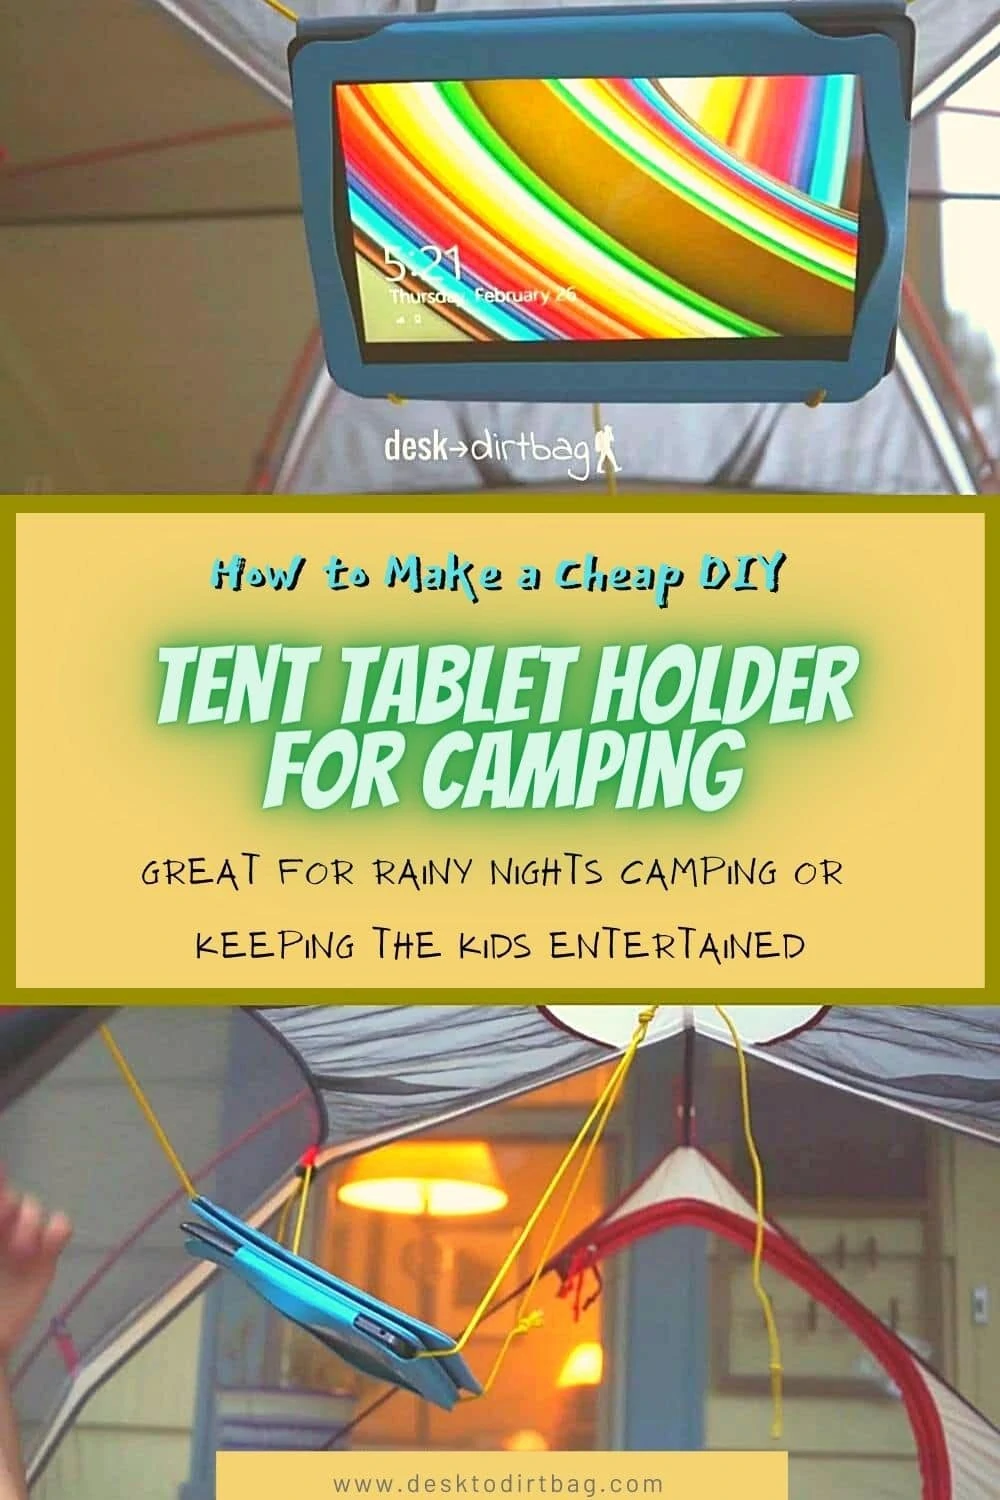 How to Make a Cheap DIY Tent Tablet Holder for Camping how-to, featured